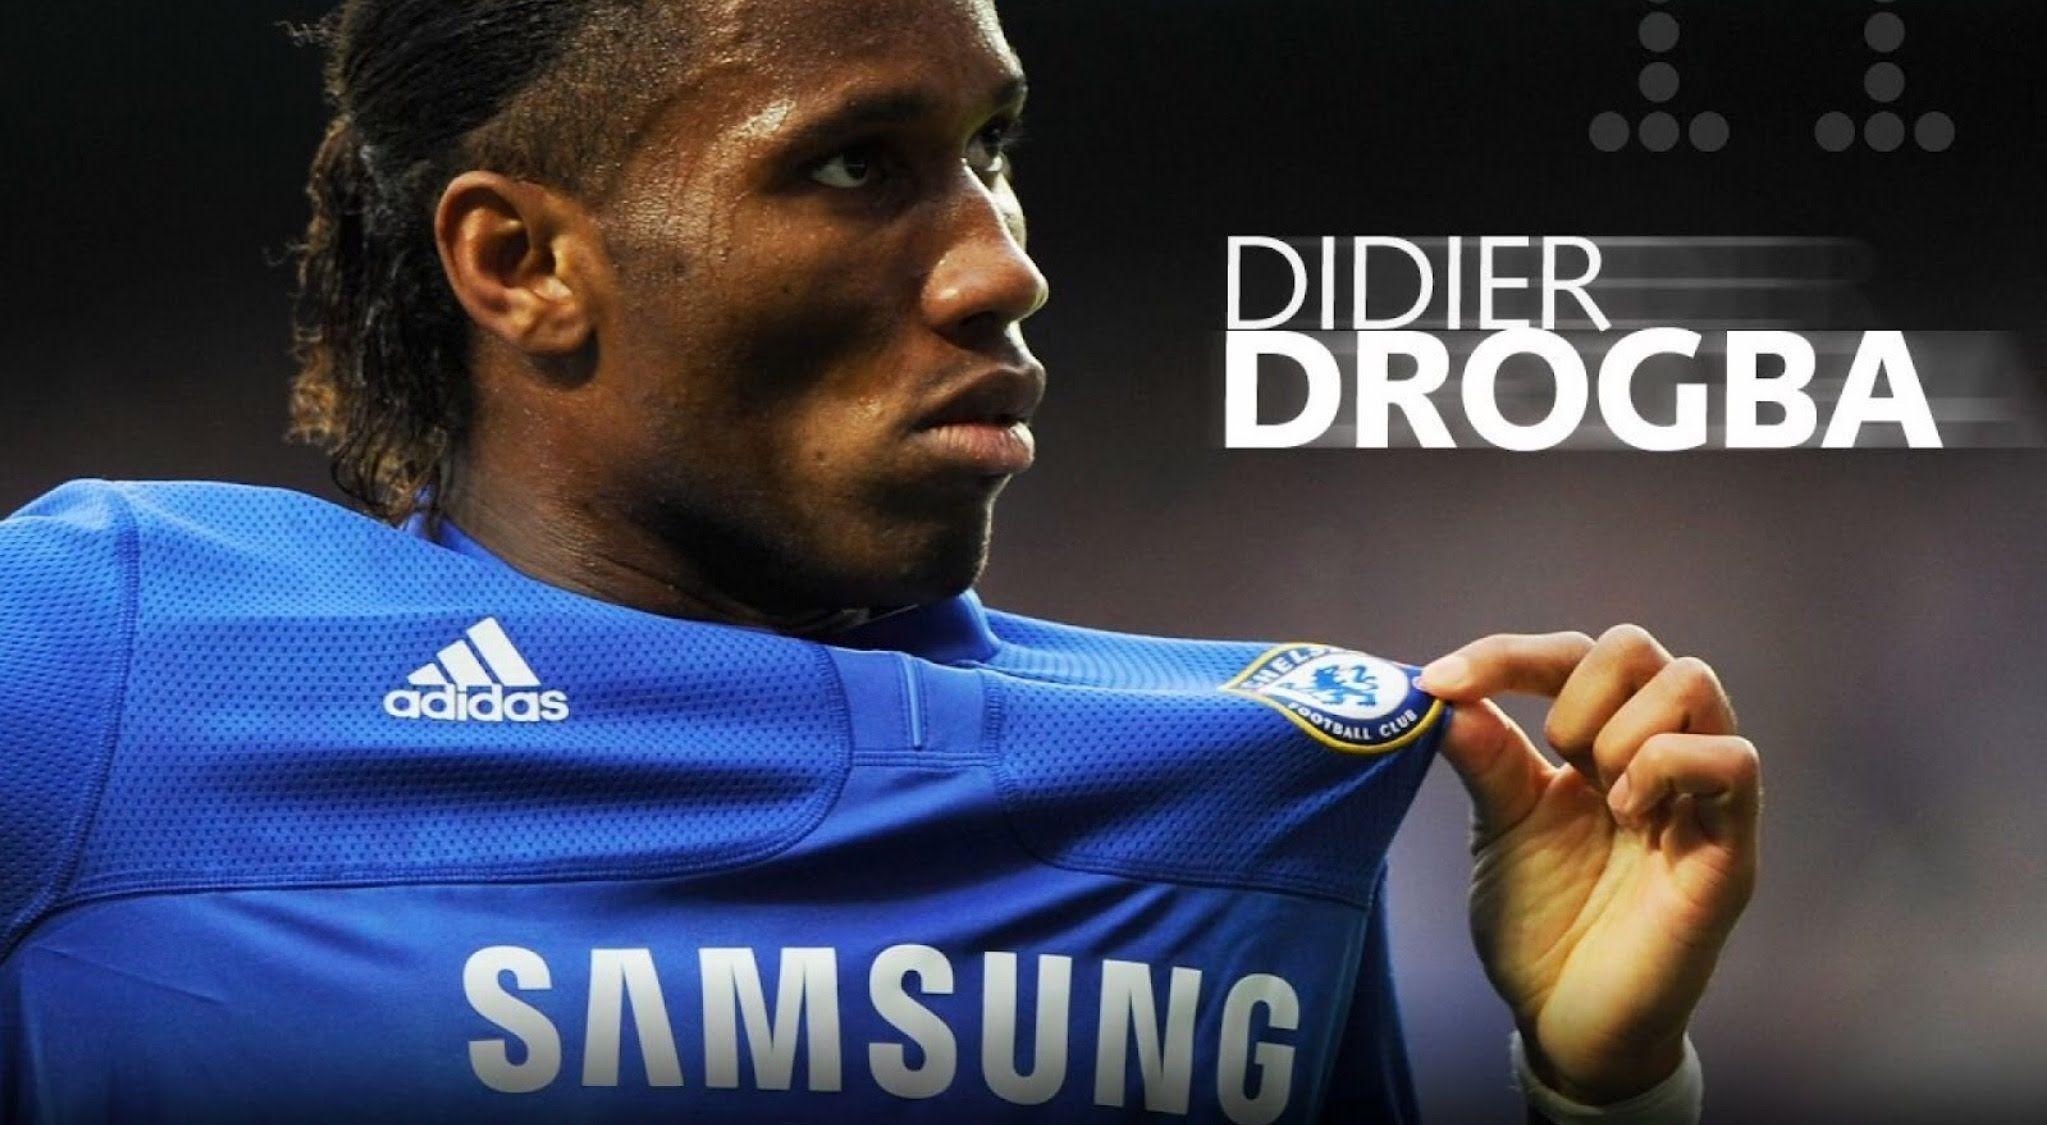 Drogba Wallpaper - Download to your mobile from PHONEKY